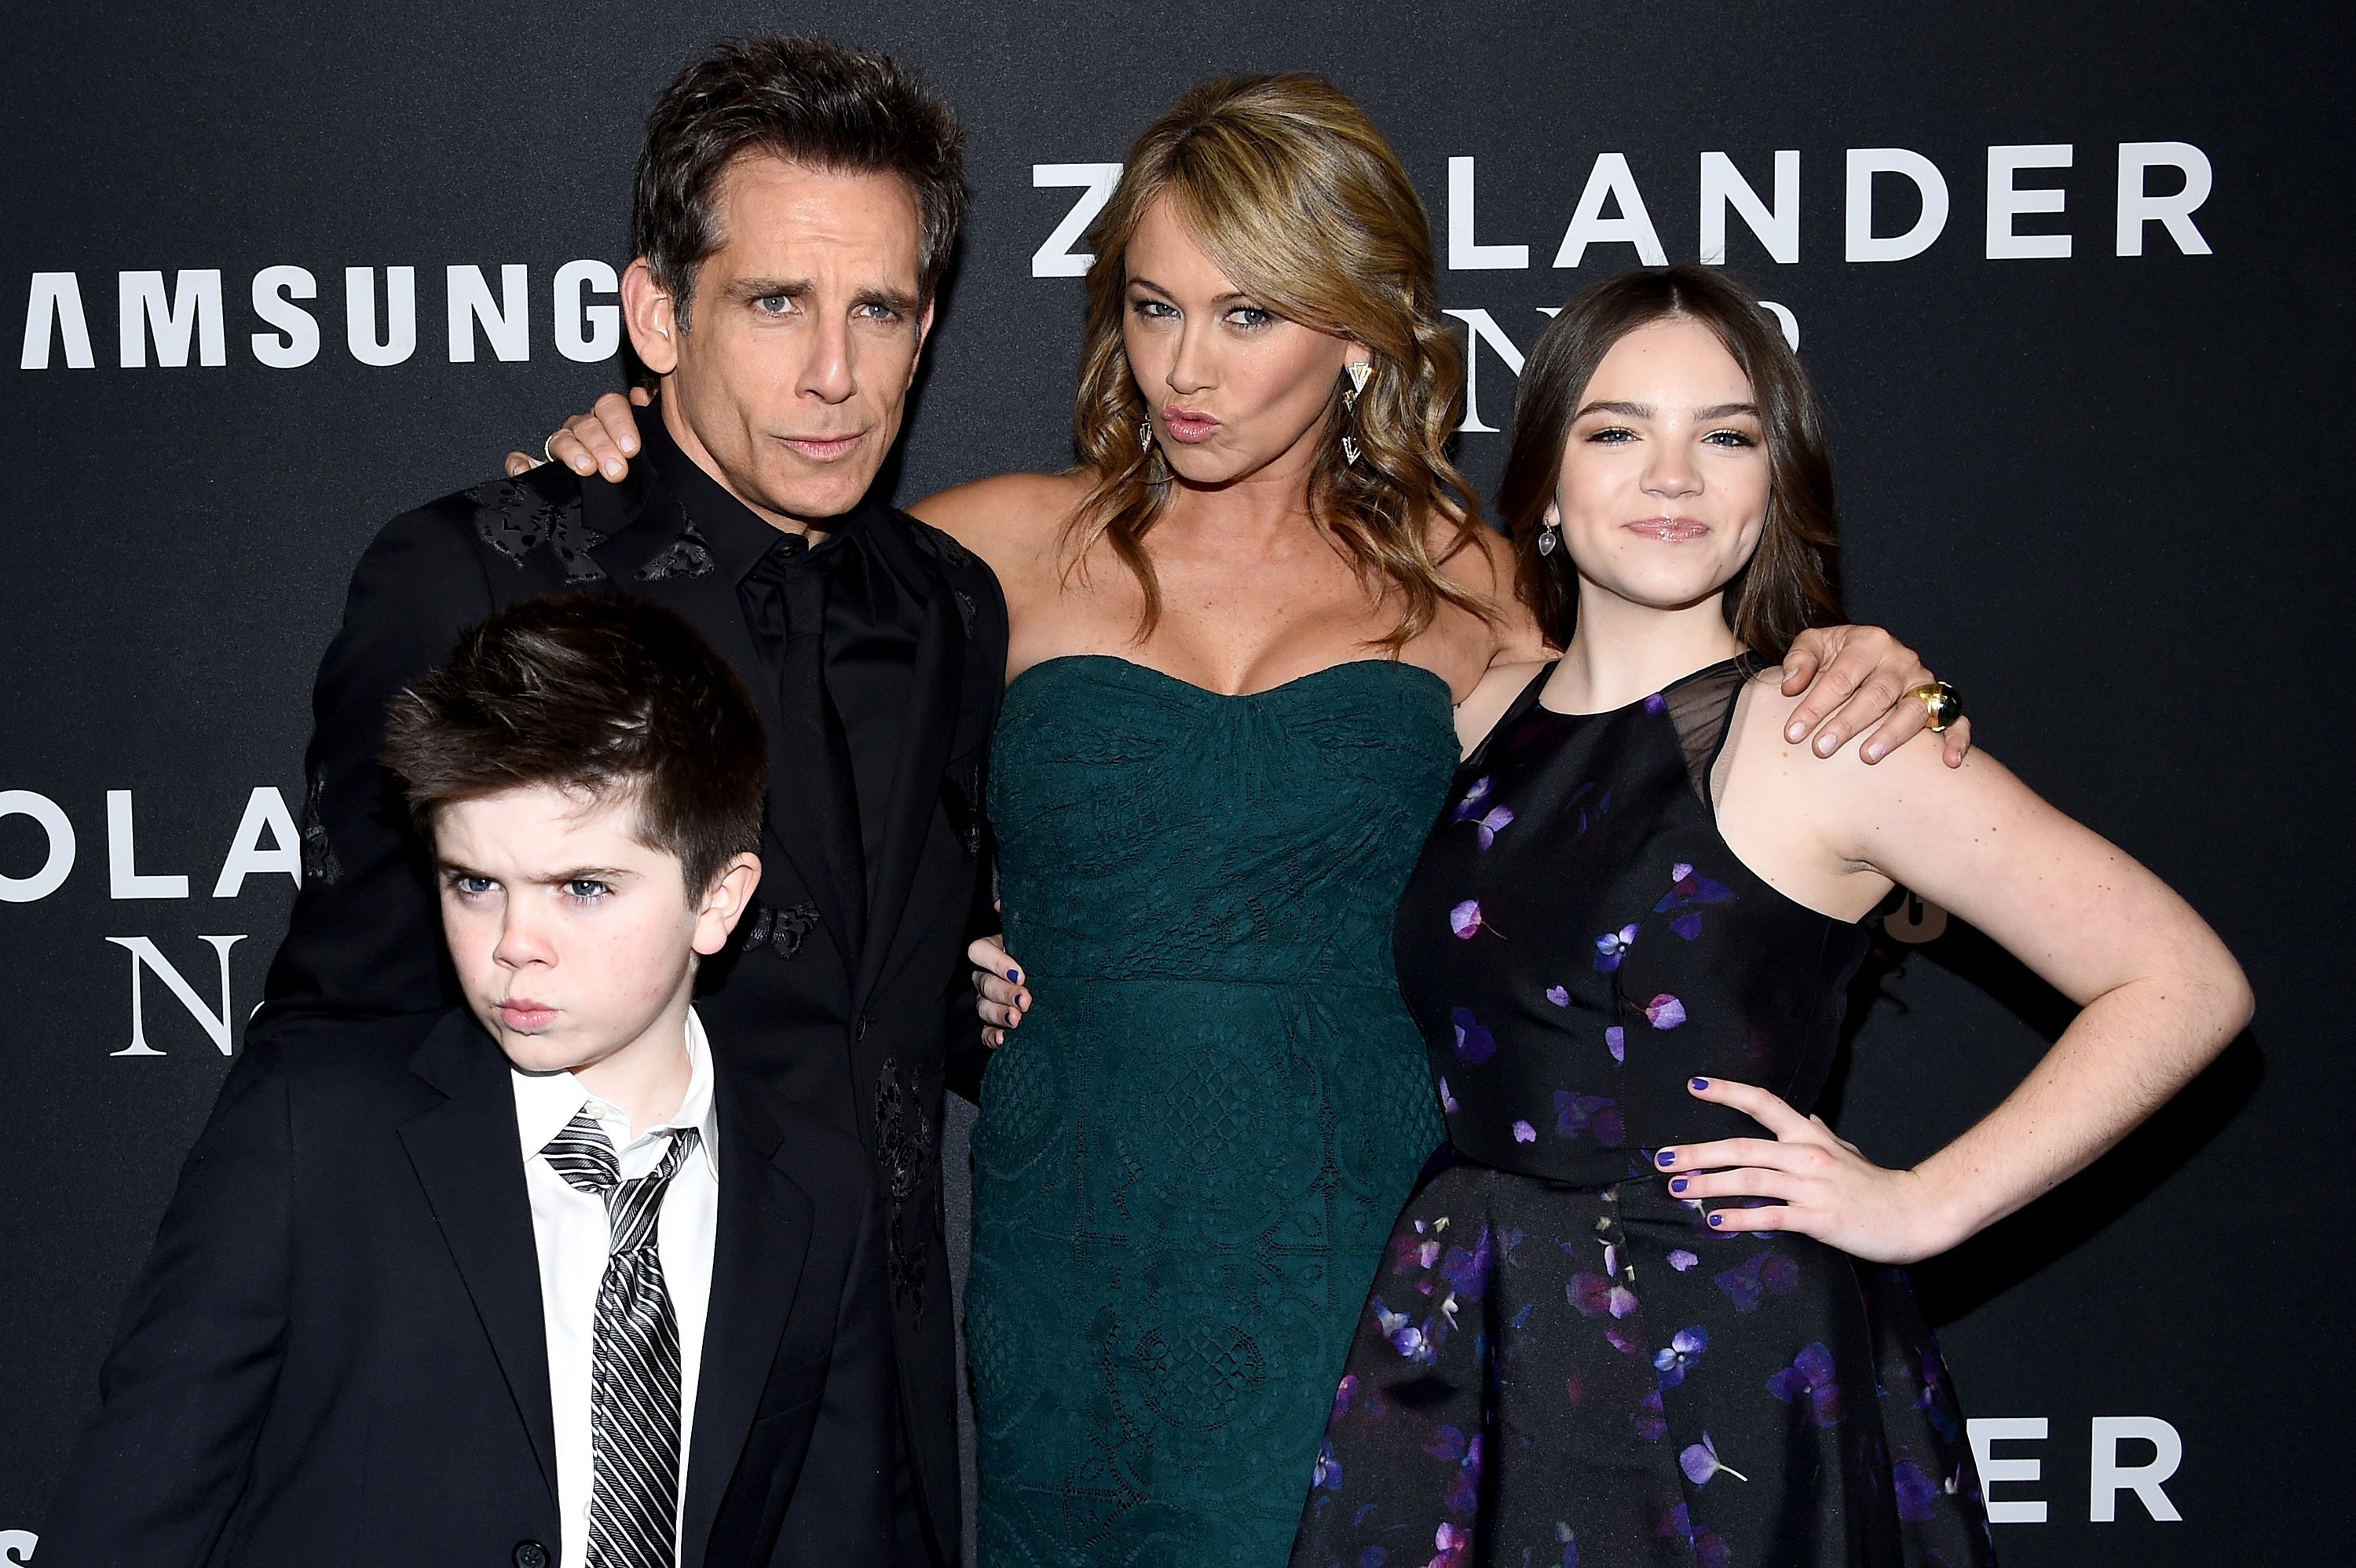 The family picture of Ben Stiller and Christine Taylor.